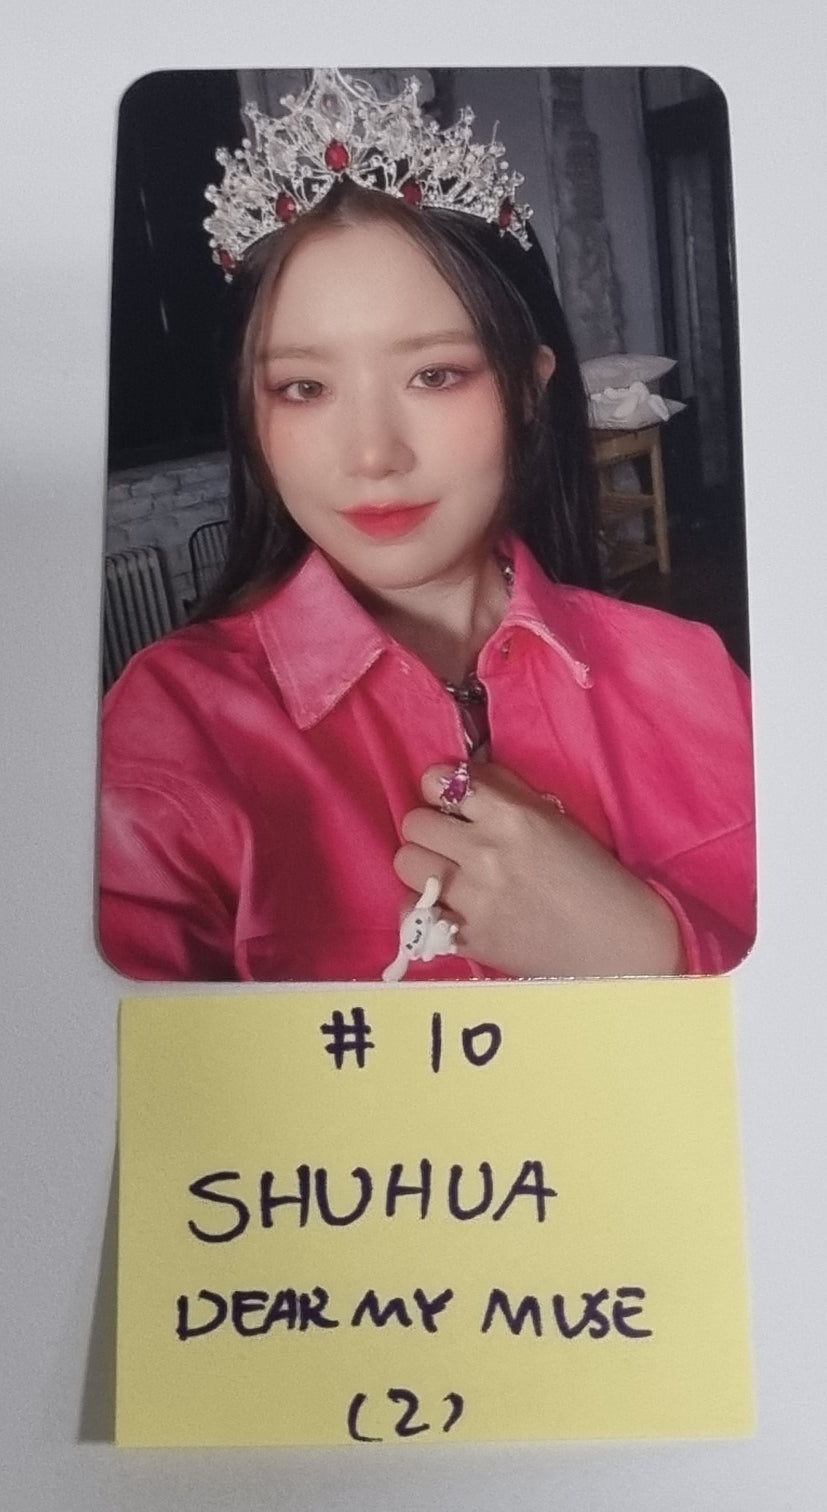 (g) I-DLE "I Feel" - Dear My Muse Pre-Order Benefit Photocard